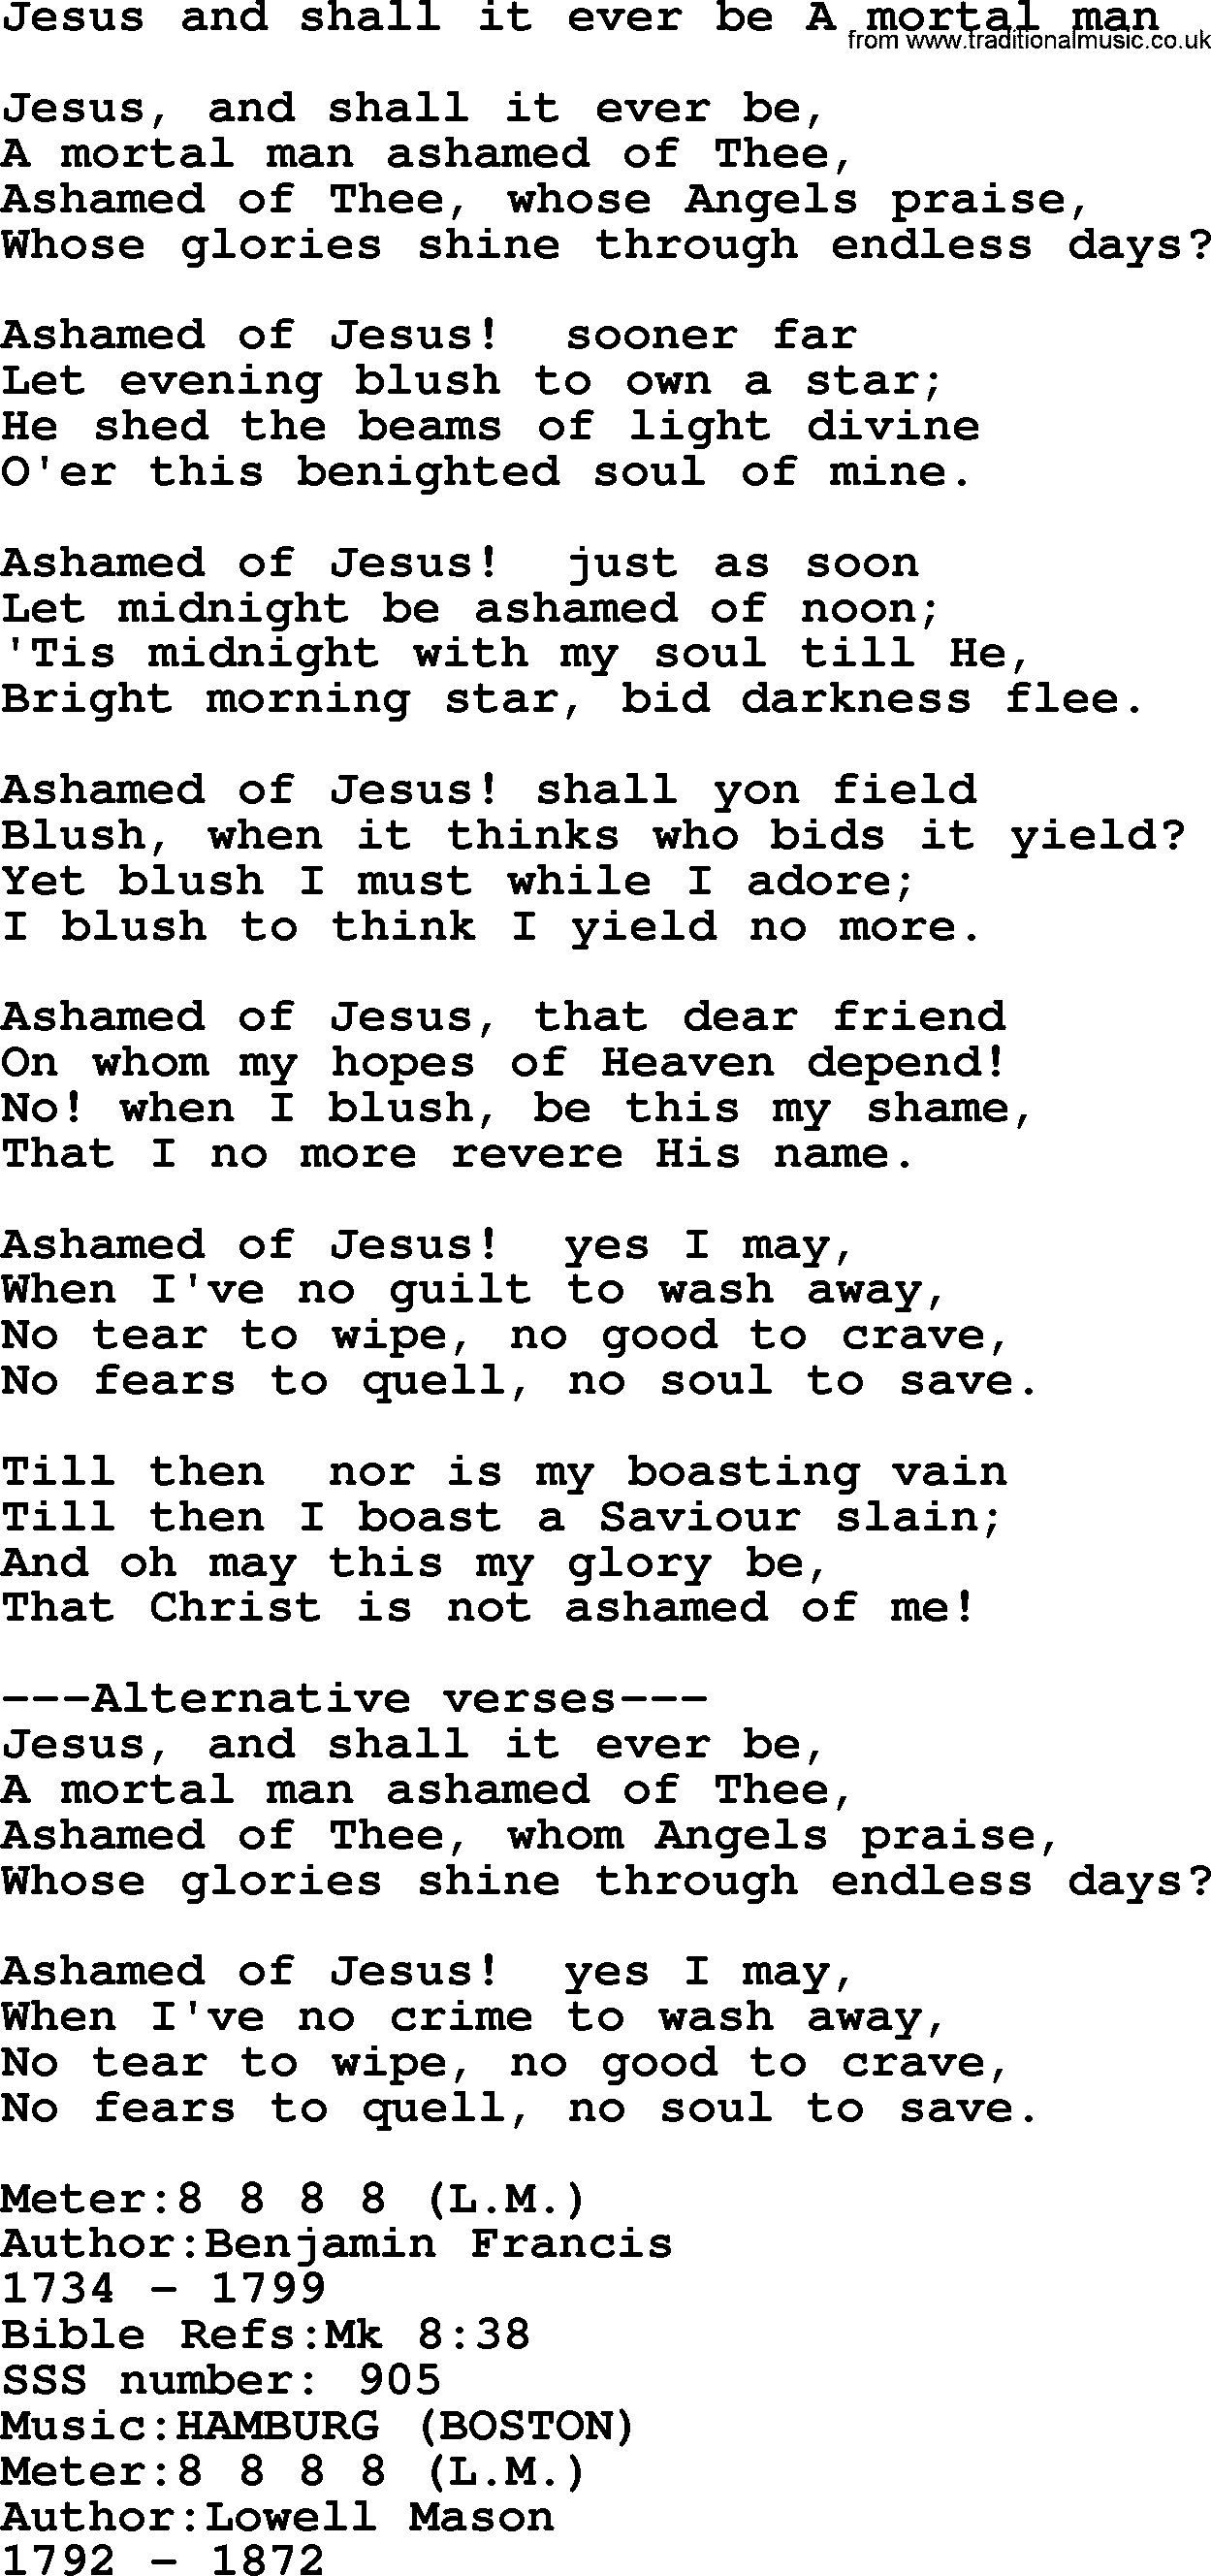 Sacred Songs and Solos complete, 1200 Hymns, title: Jesus And Shall It Ever Be A Mortal Man, lyrics and PDF